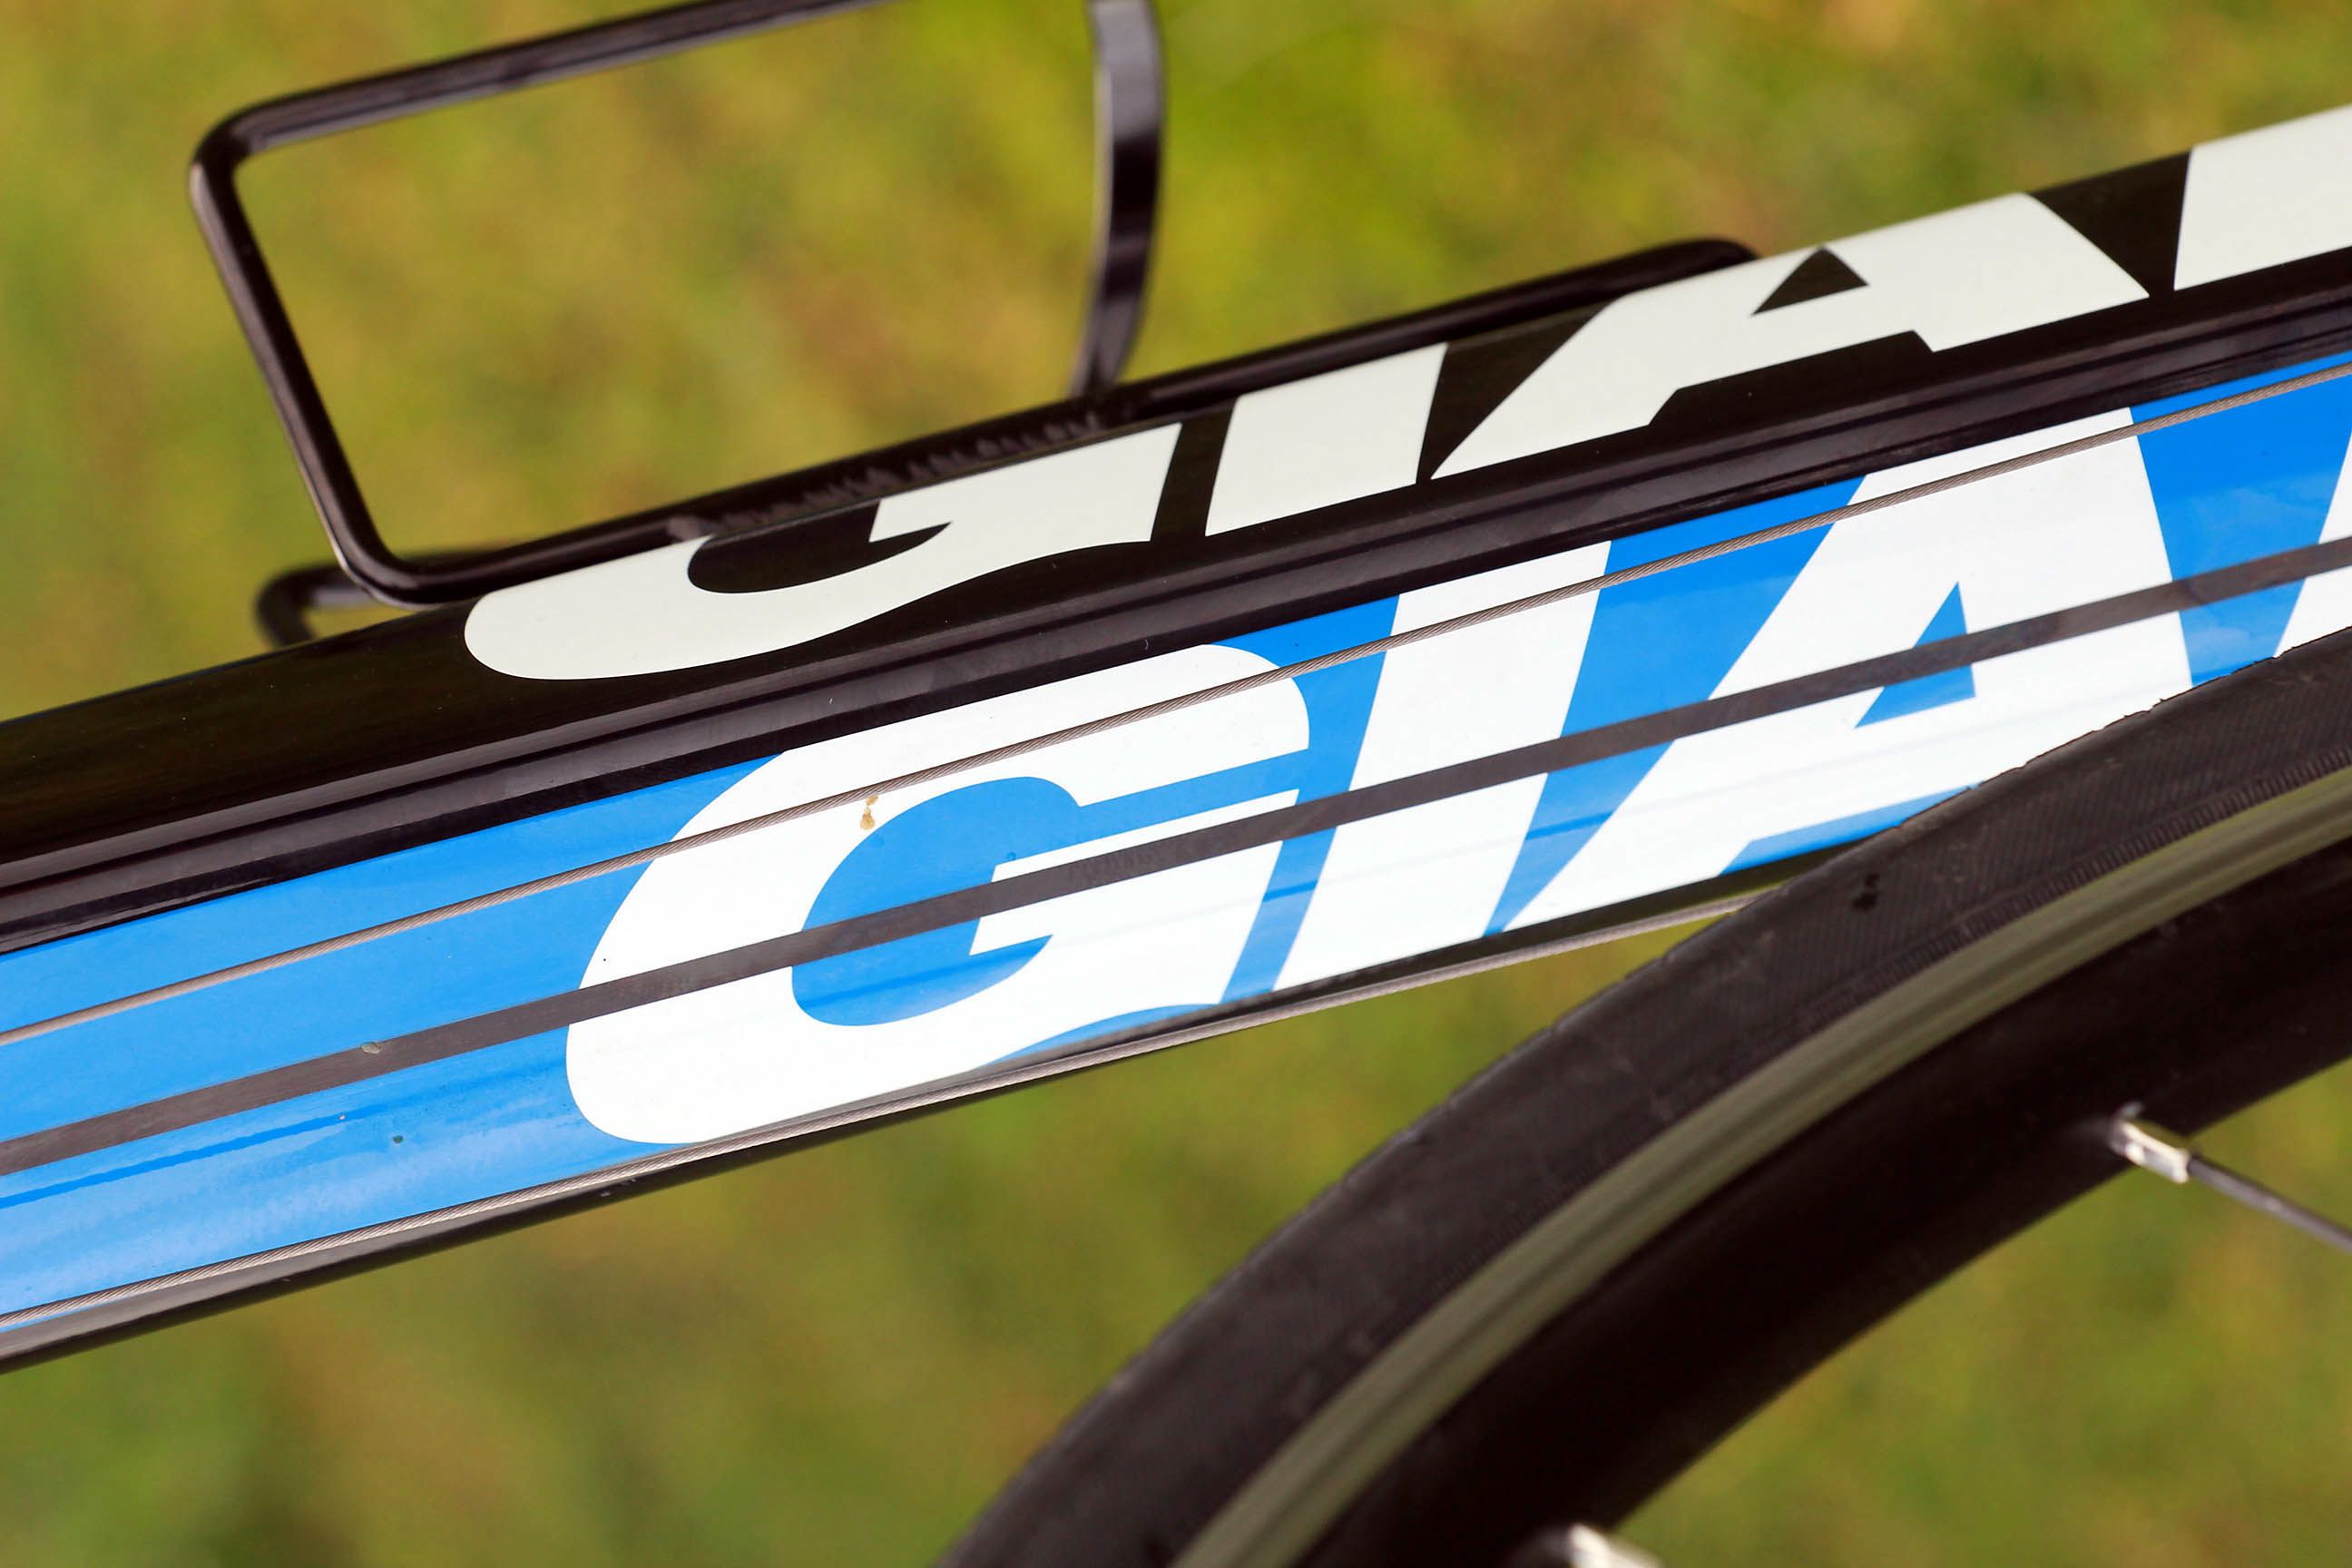 Review: Giant TCR1 Compact | road.cc